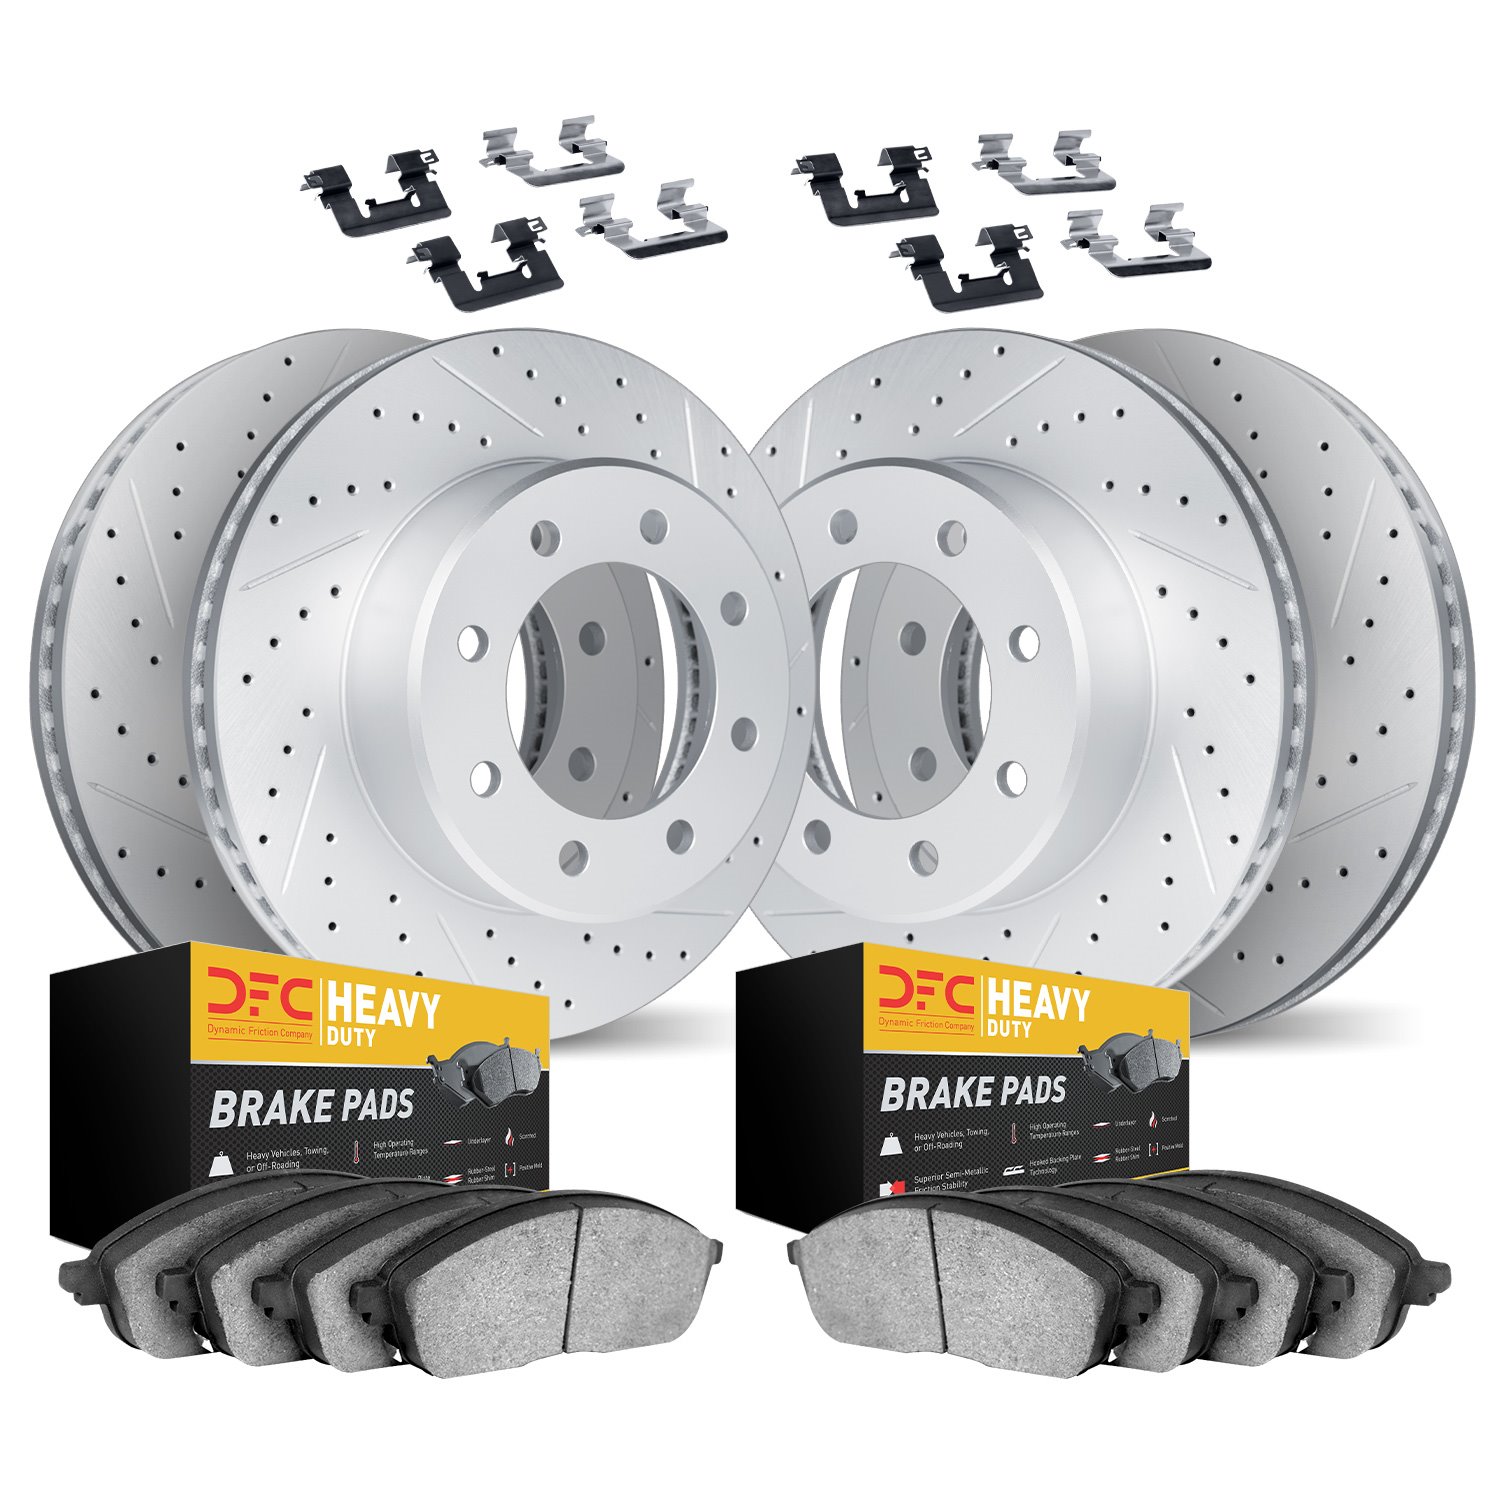 2214-99032 Geoperformance Drilled/Slotted Rotors w/Heavy-Duty Pads Kit & Hardware, 1999-2000 Ford/Lincoln/Mercury/Mazda, Positio